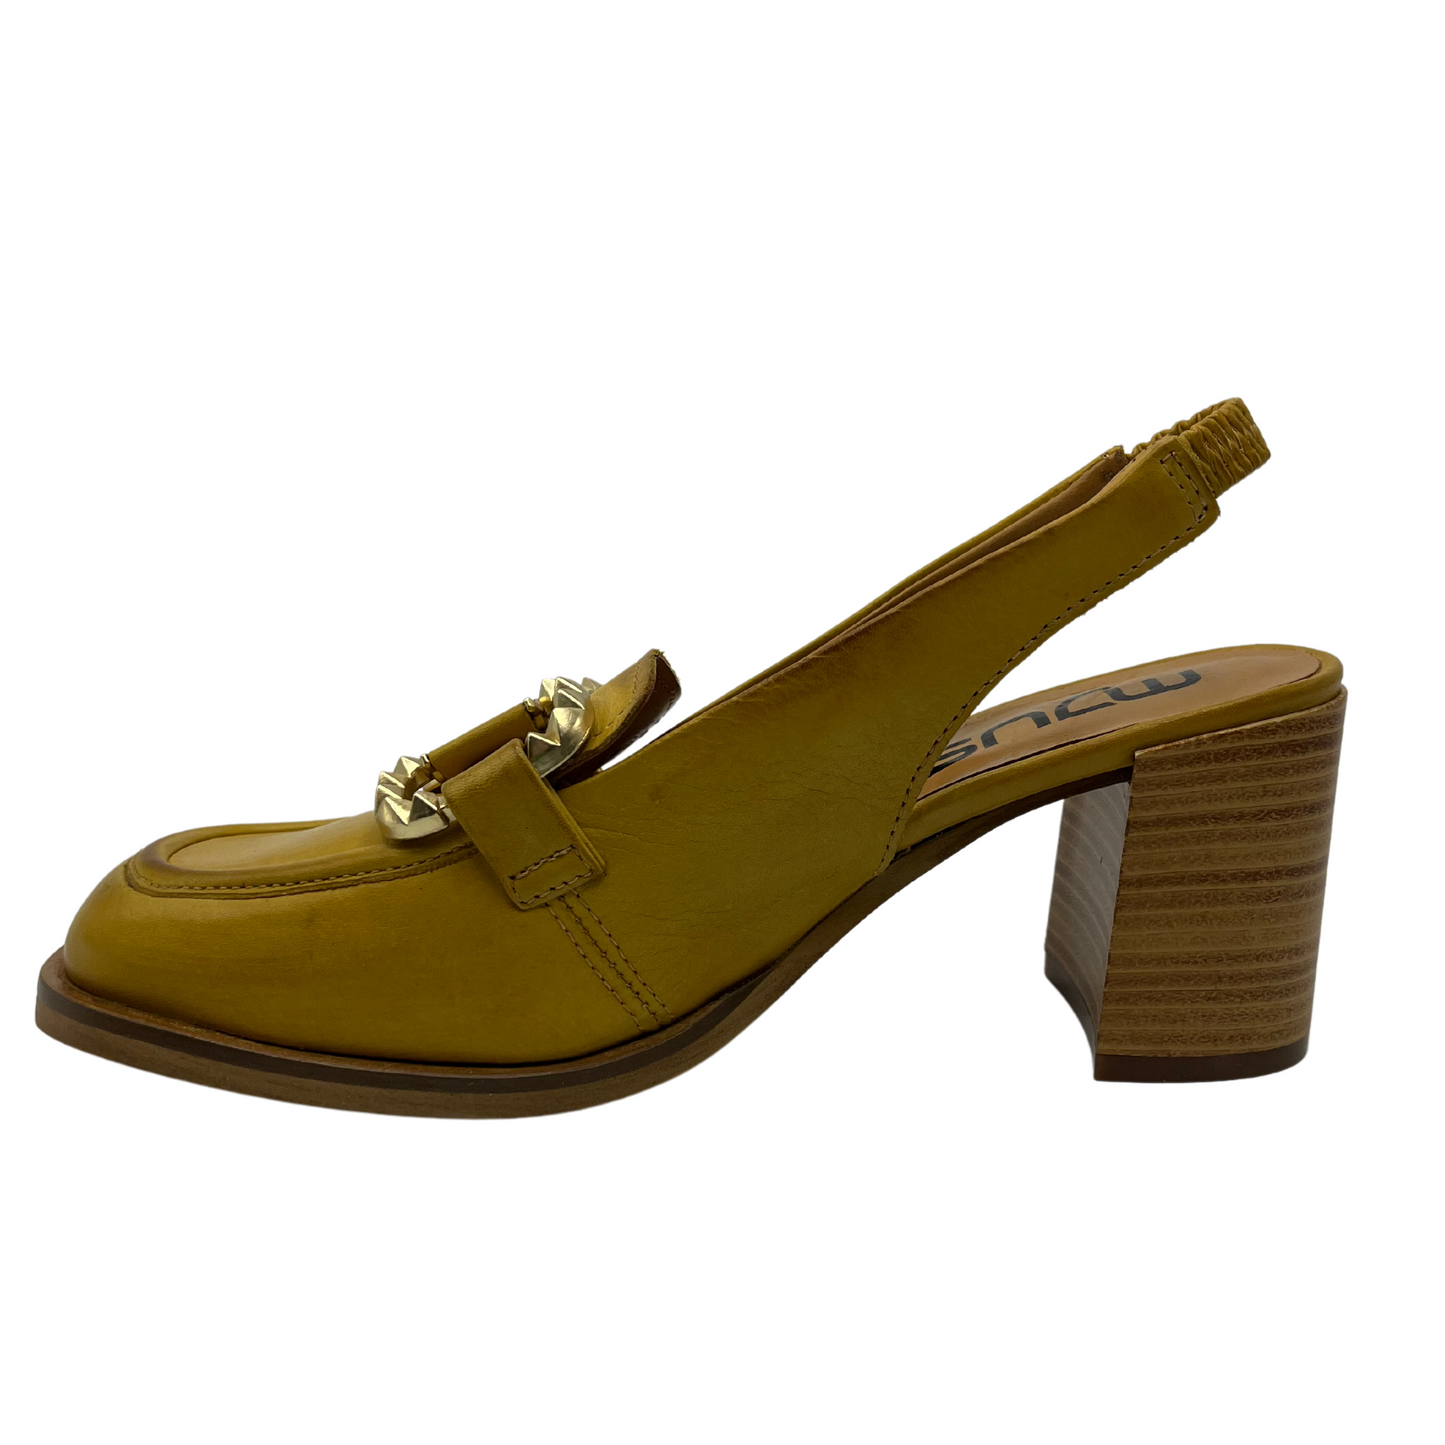 Left facing view of mustard yellow loafer with sling back strap and block heel